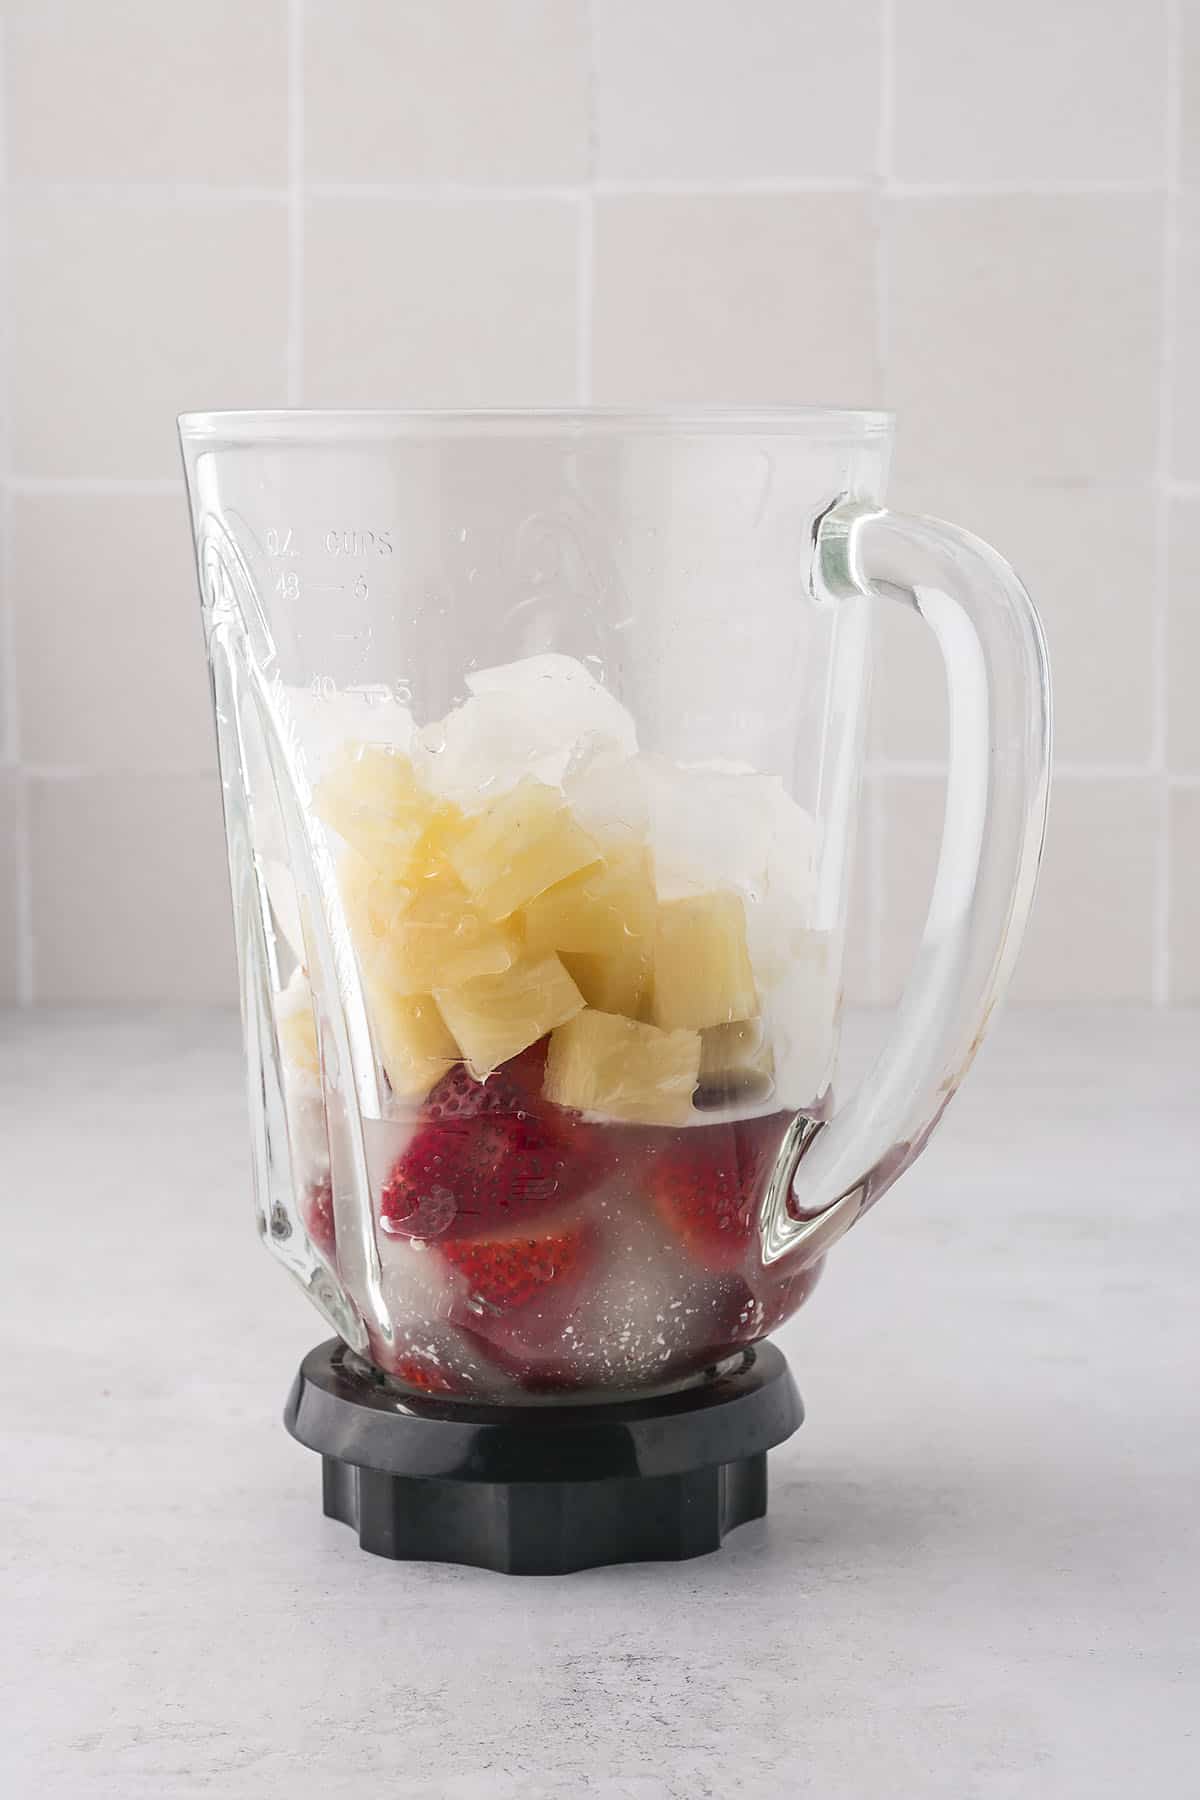 Ingredients for strawberry pineapple smoothie in blender.